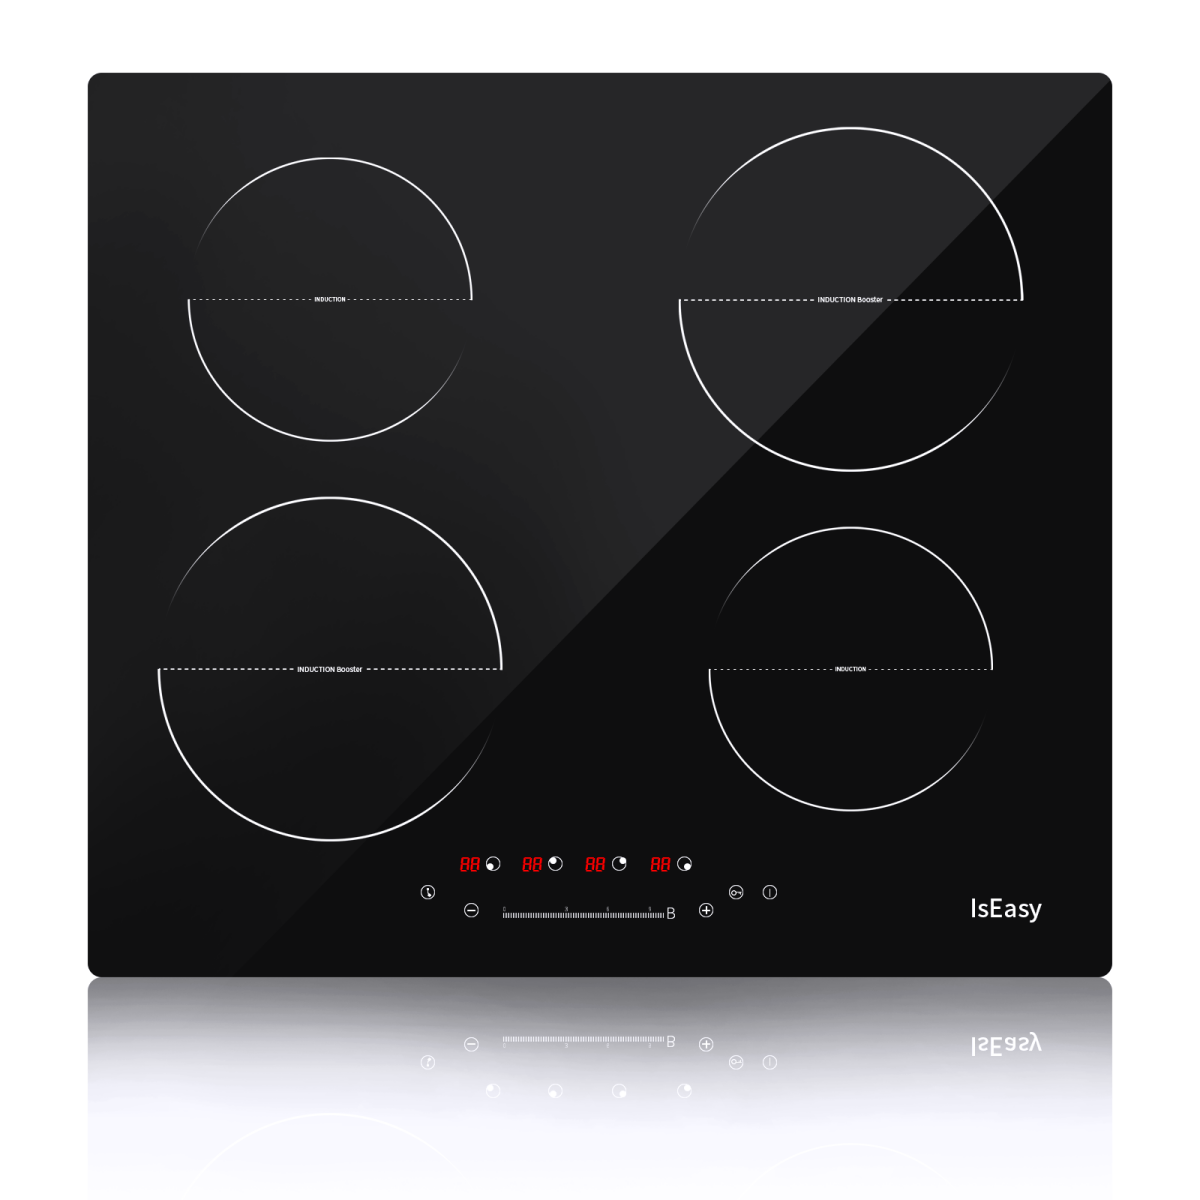 24 Inch Induction Cooktop,  IsEasy electric cooktop 4 Burners, 6800W, Built-in Induction Hob Stove Smoothtop Cooker, Timer, Touch Control, 9 Heating Levels, Booster Function, Glass Black Surface, 220V-240V